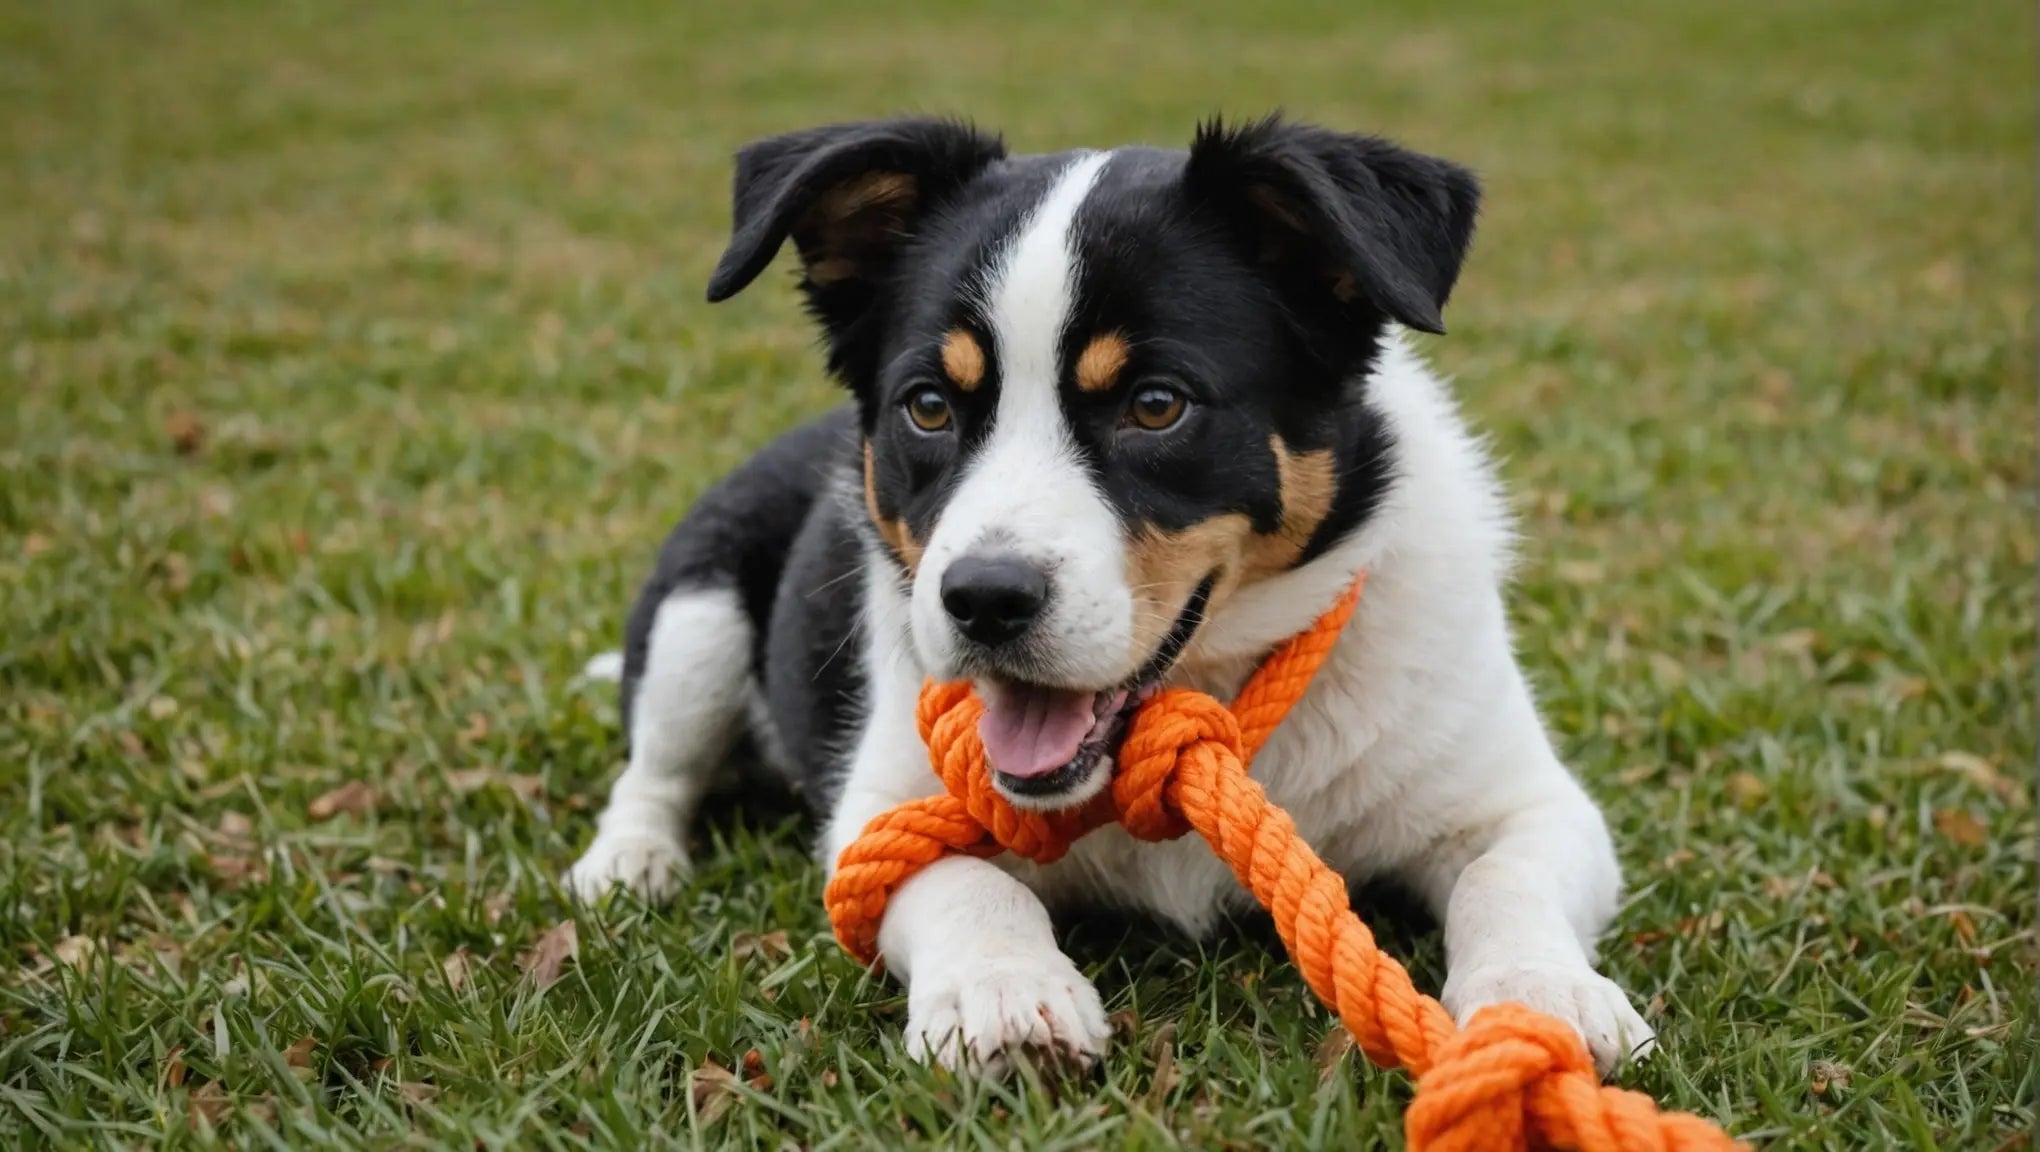 Keep Your Dog Active and Entertained with Rope Toys